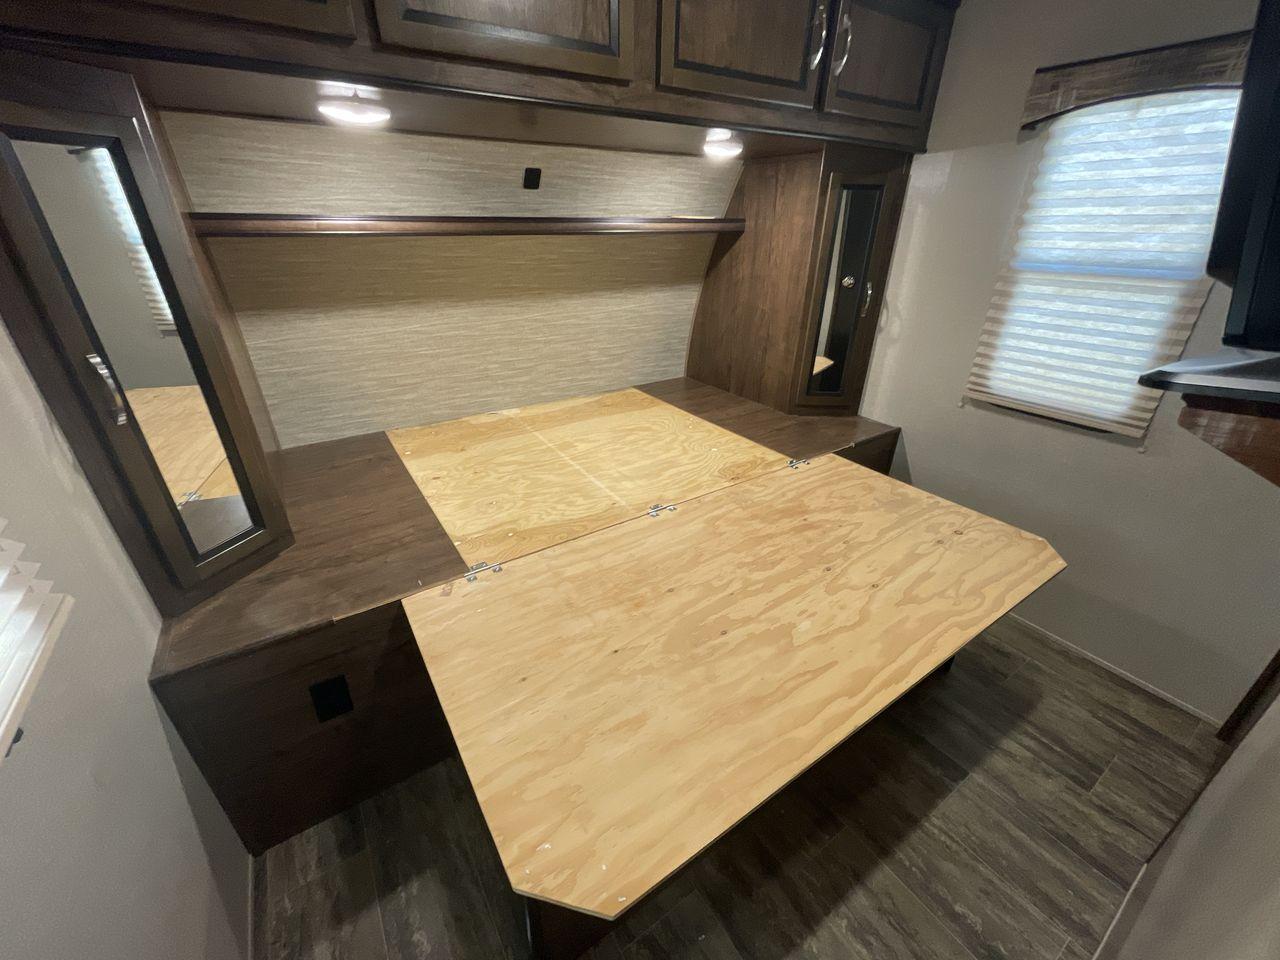 2018 CRUISER RADIANCE 28QD (5RXFB3324J2) , Length: 33.33 ft. | Dry Weight: 6,025 lbs. | Gross Weight: 9,600 lbs. | Slides: 1 transmission, located at 4319 N Main Street, Cleburne, TX, 76033, (817) 221-0660, 32.435829, -97.384178 - The 2018 Cruiser RV Radiance 28QD seamlessly blends style, comfort, and functionality to redefine your camping experience. Measuring 33 feet in length, this RV is designed for spacious and lightweight towing. The aluminum frame construction ensures durability while maintaining a manageable weight fo - Photo #17